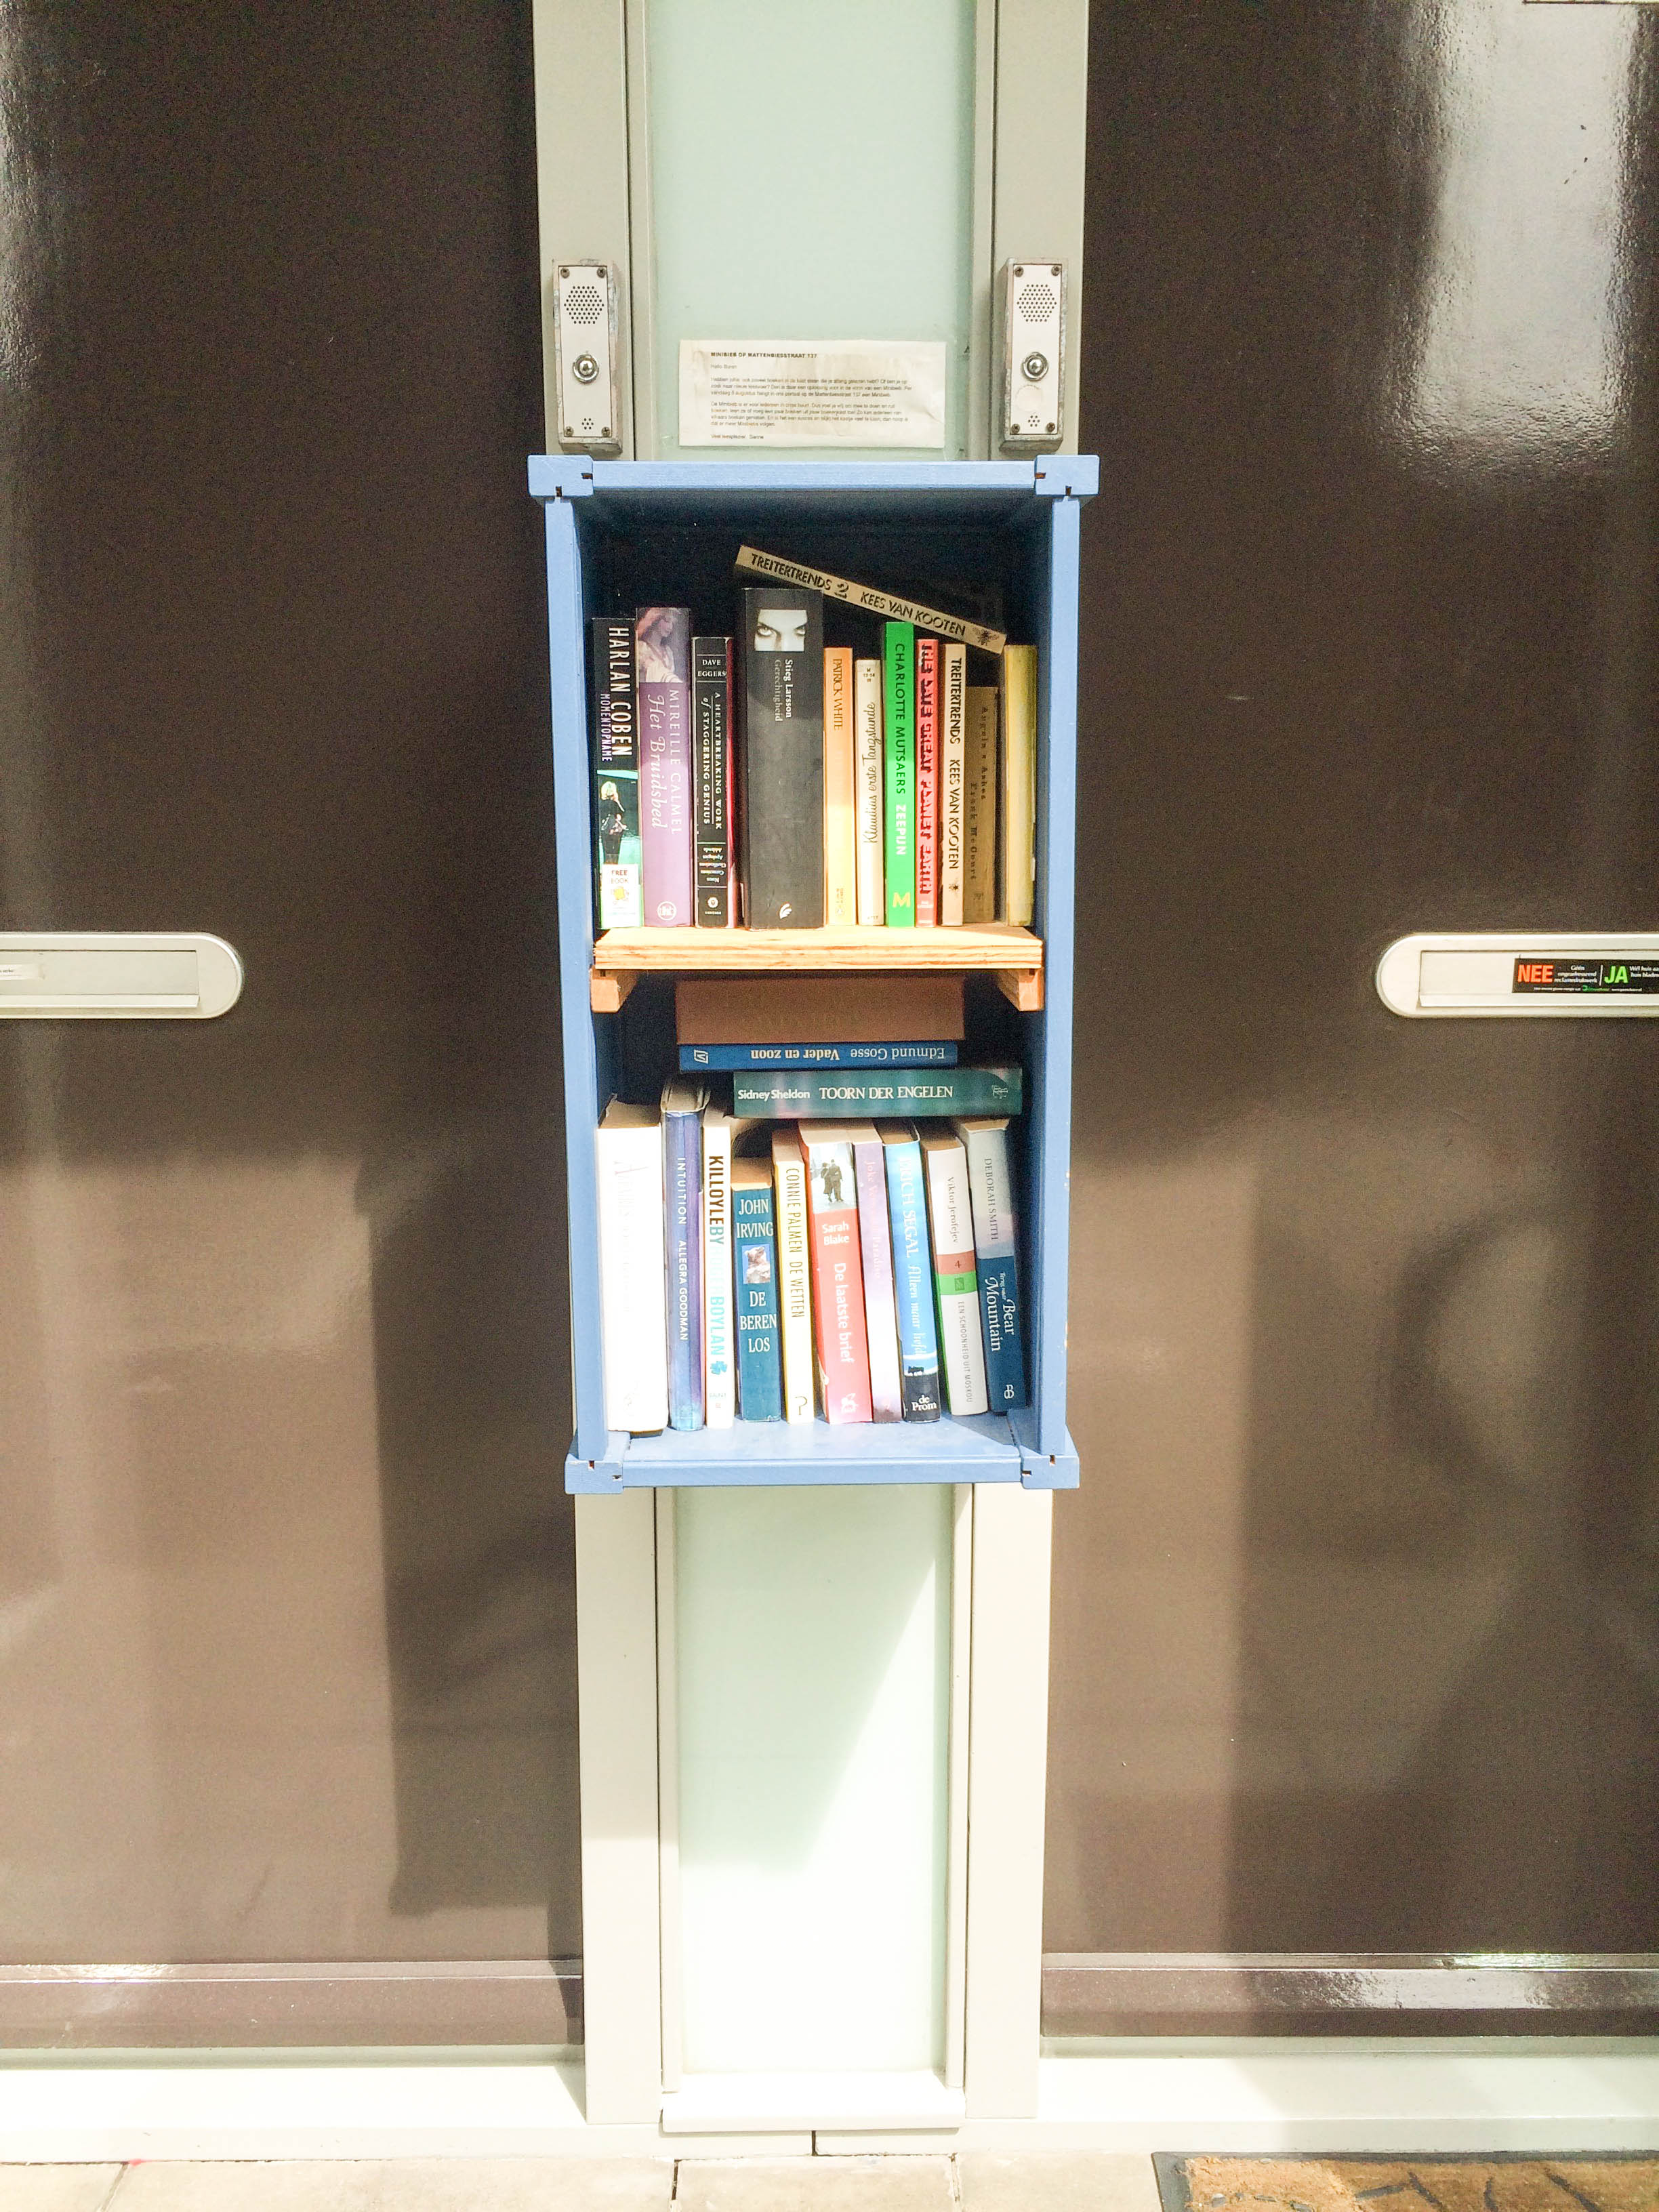 this micro bookshelf between apartment doors in Amsterdam is the definition of a tiny free public library, full of books in English and Dutch